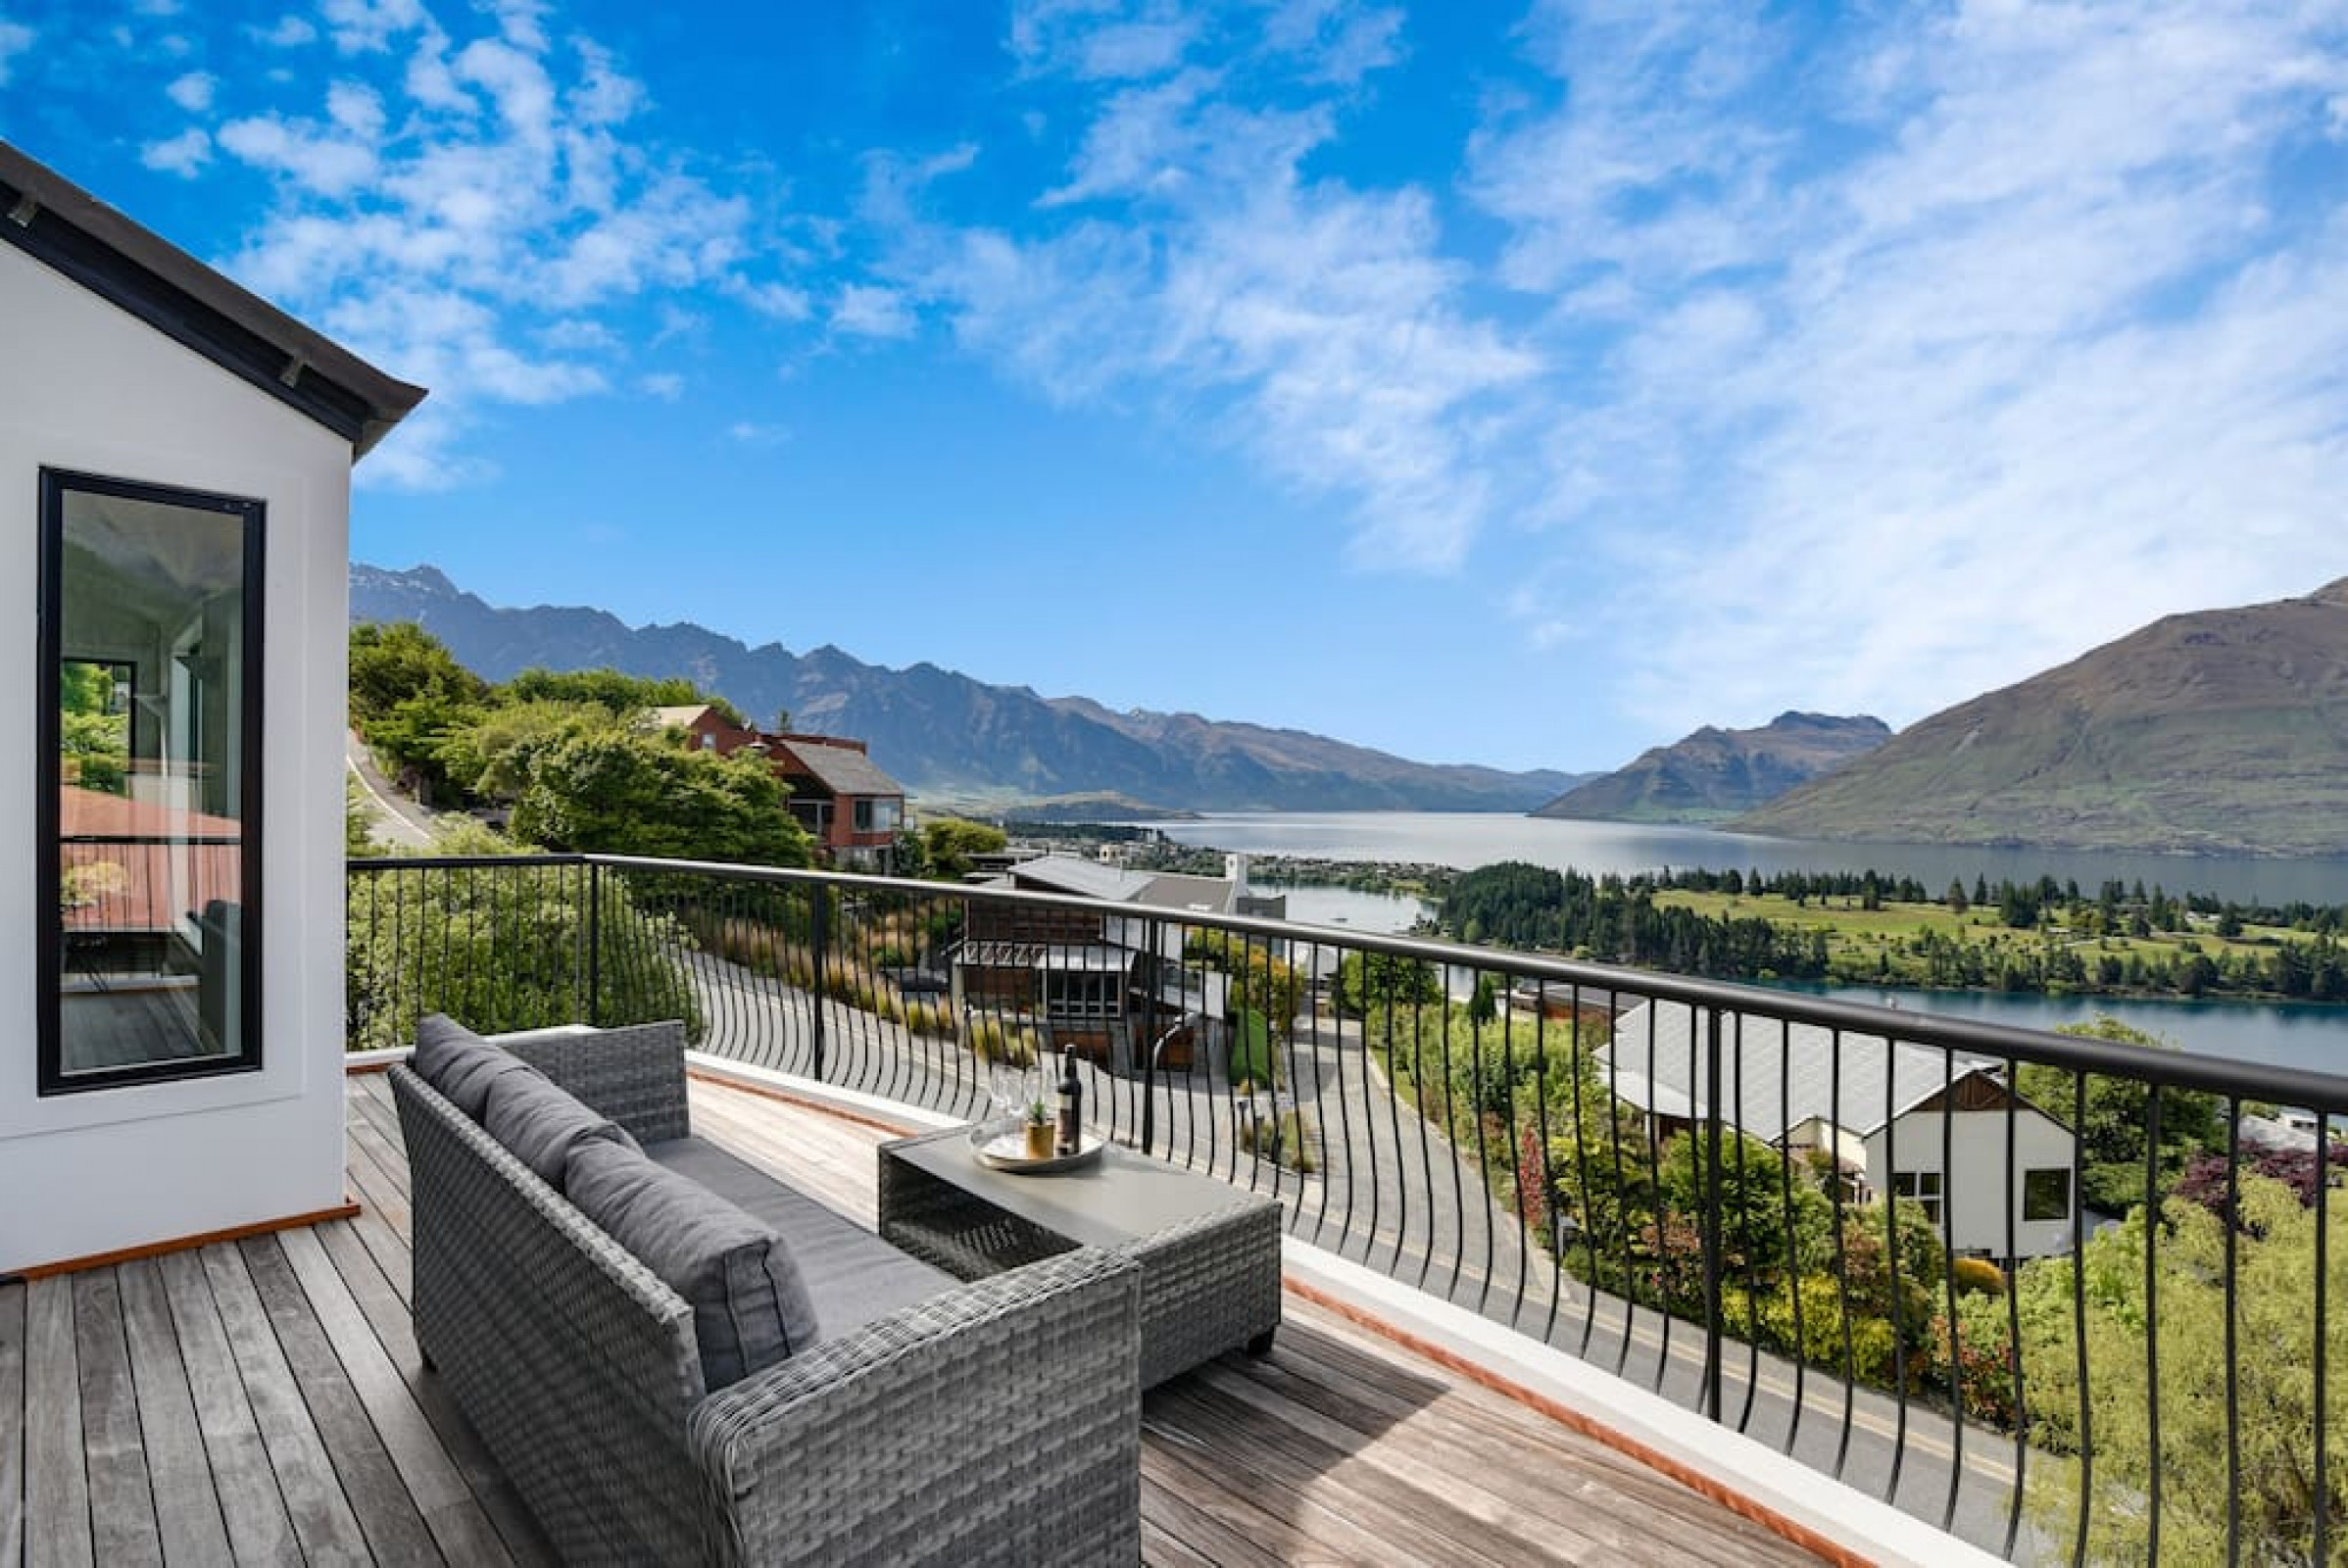 Property Image 1 - Scenic Pristine Holiday Home Amidst Mountains and Lake
